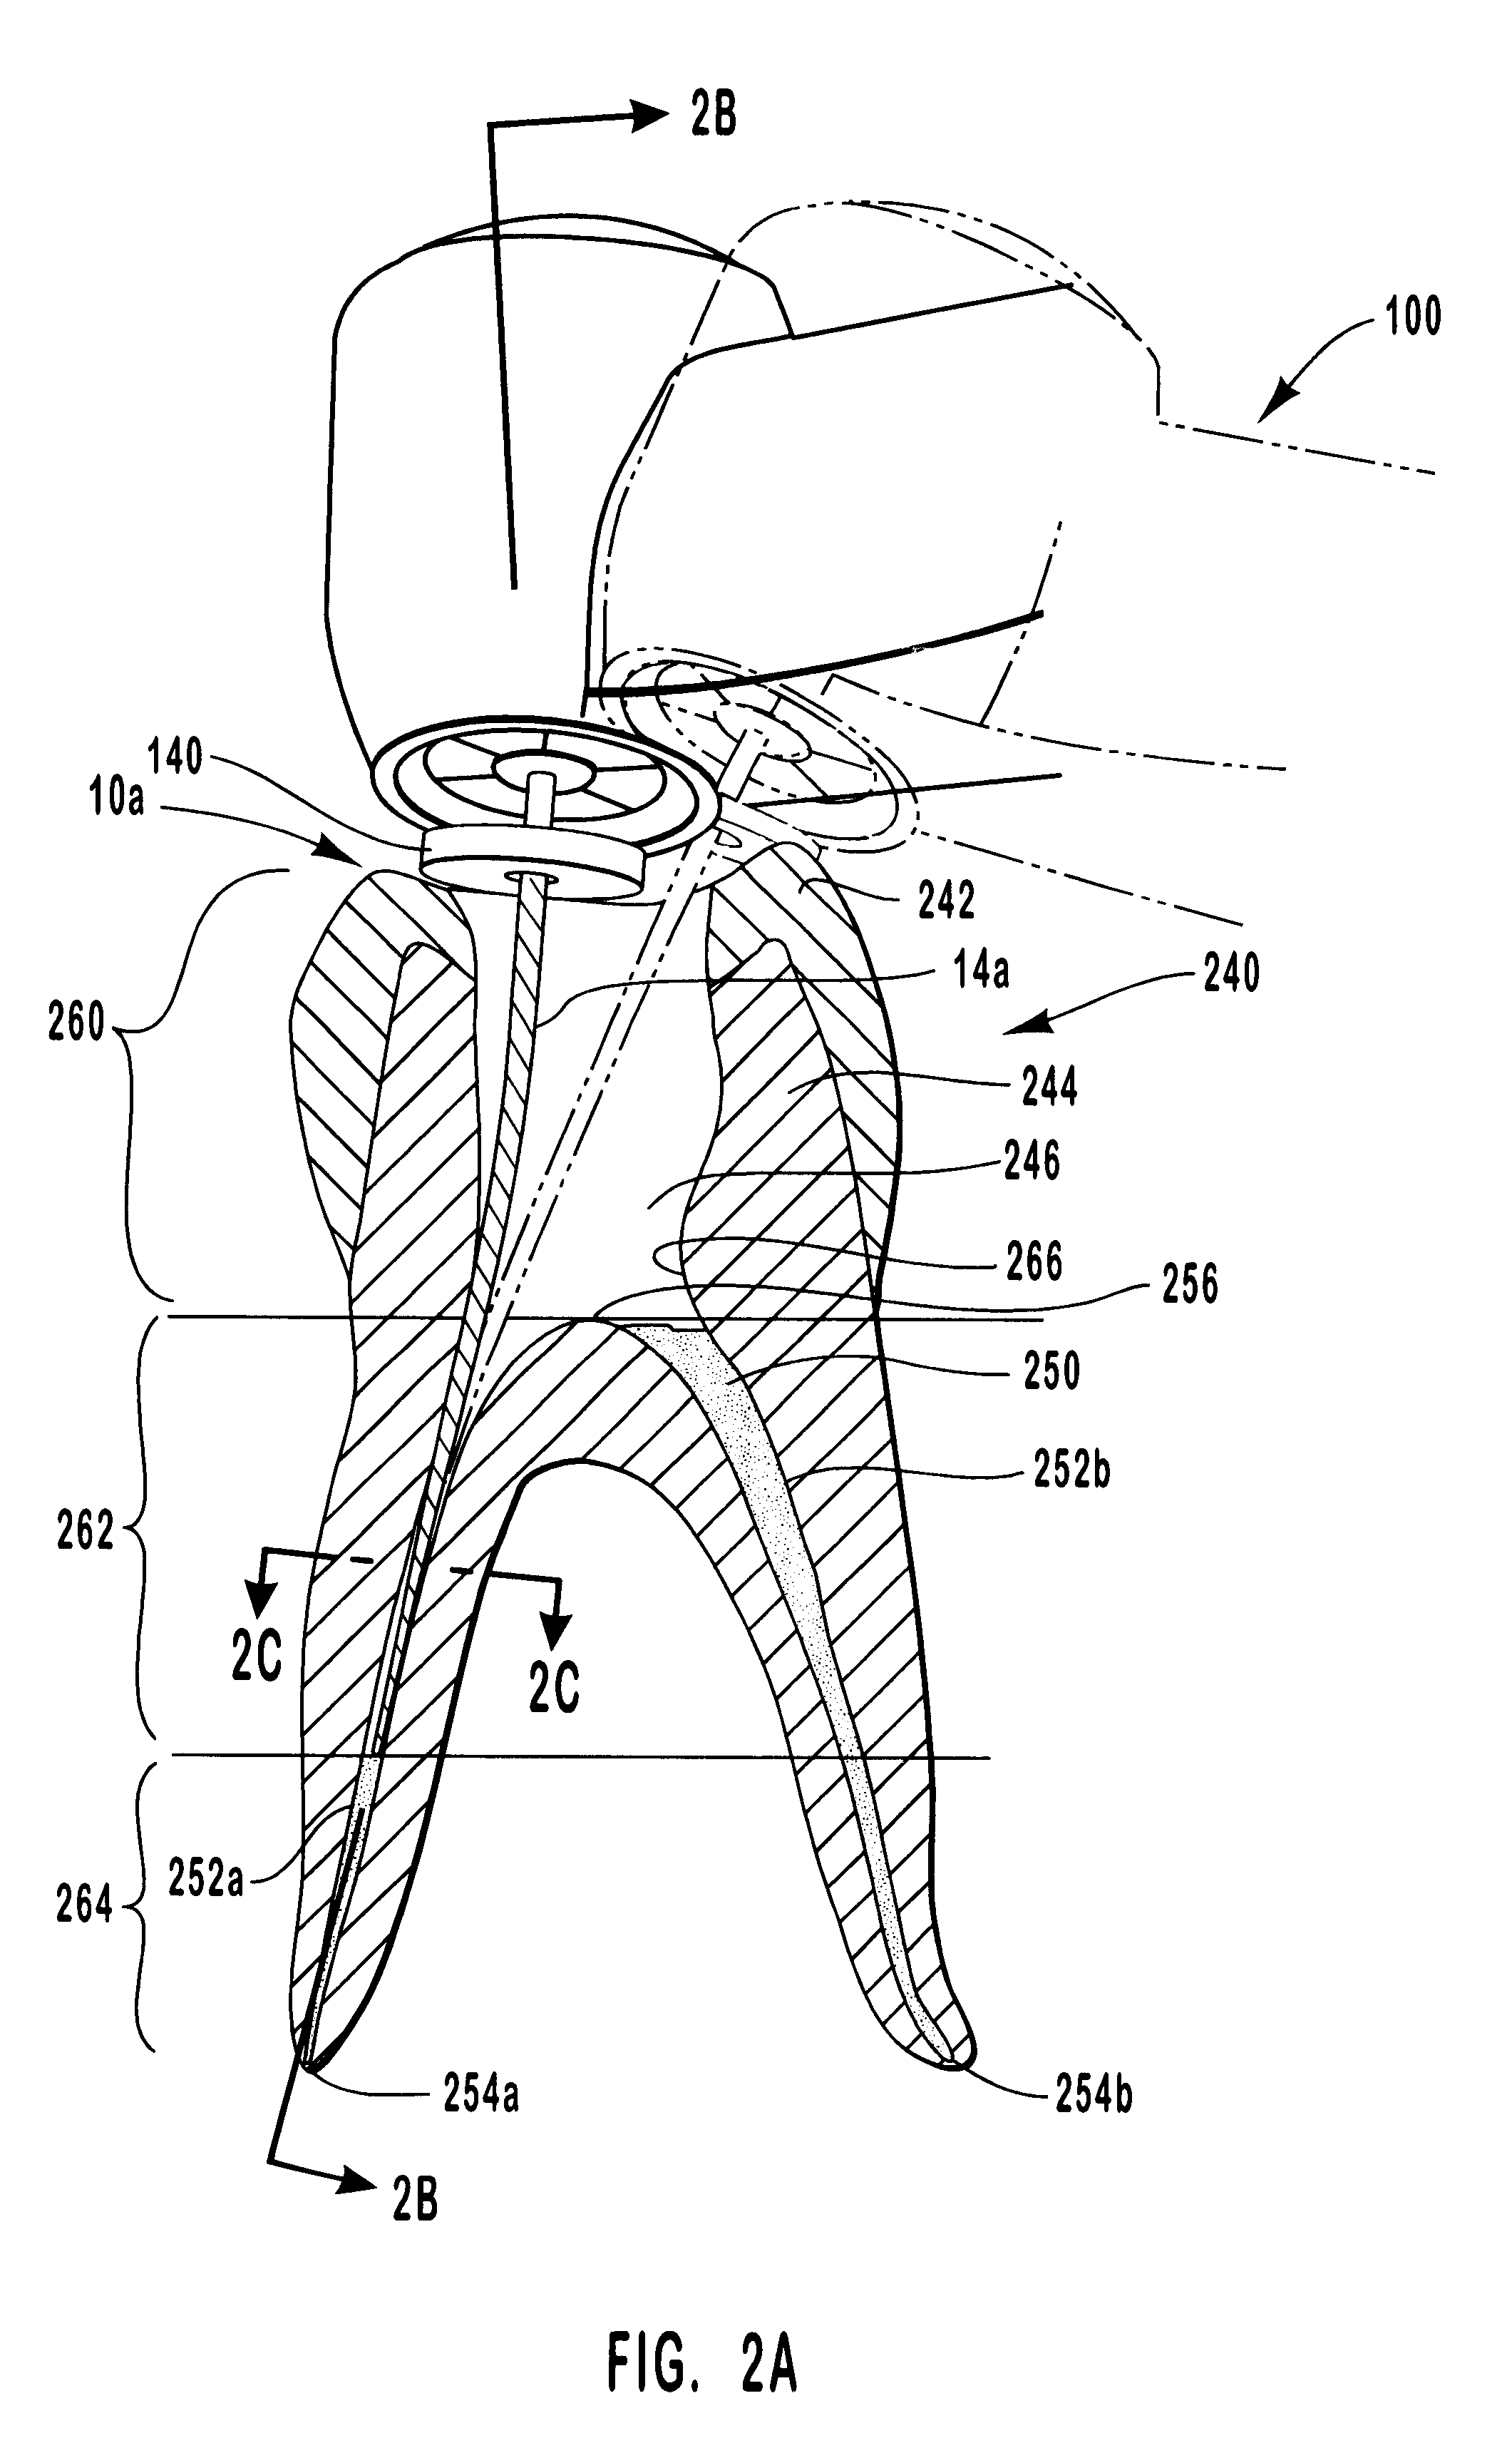 Endodontic systems and methods for preparing apical portions of root canals with a set of files having large tapers